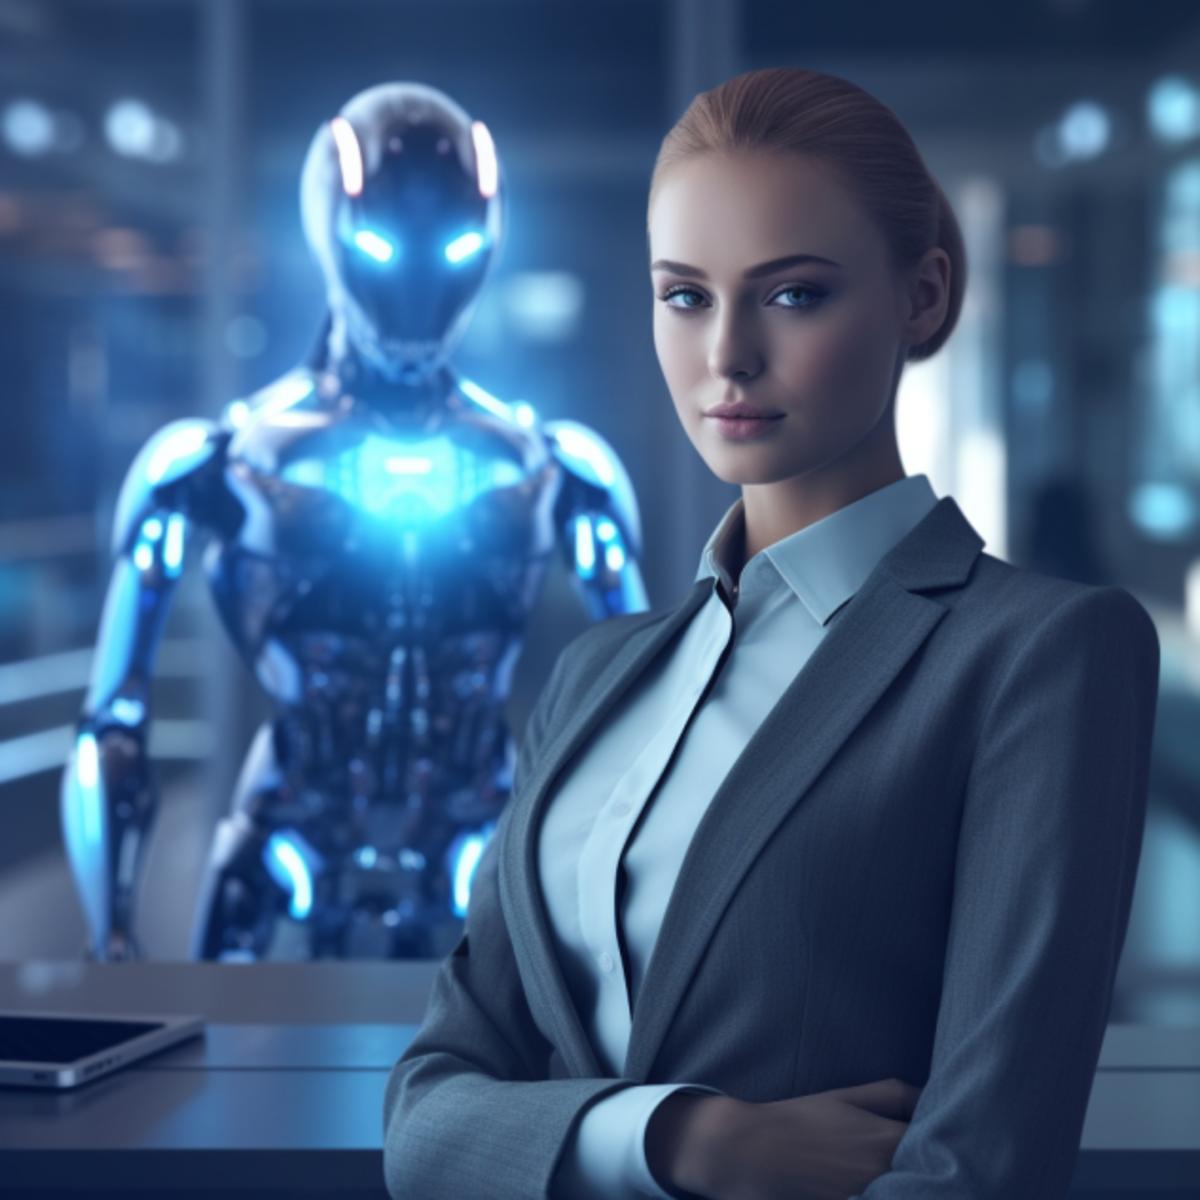 Virtual Assistants: What You Need to Know About These Powerful AI Tools